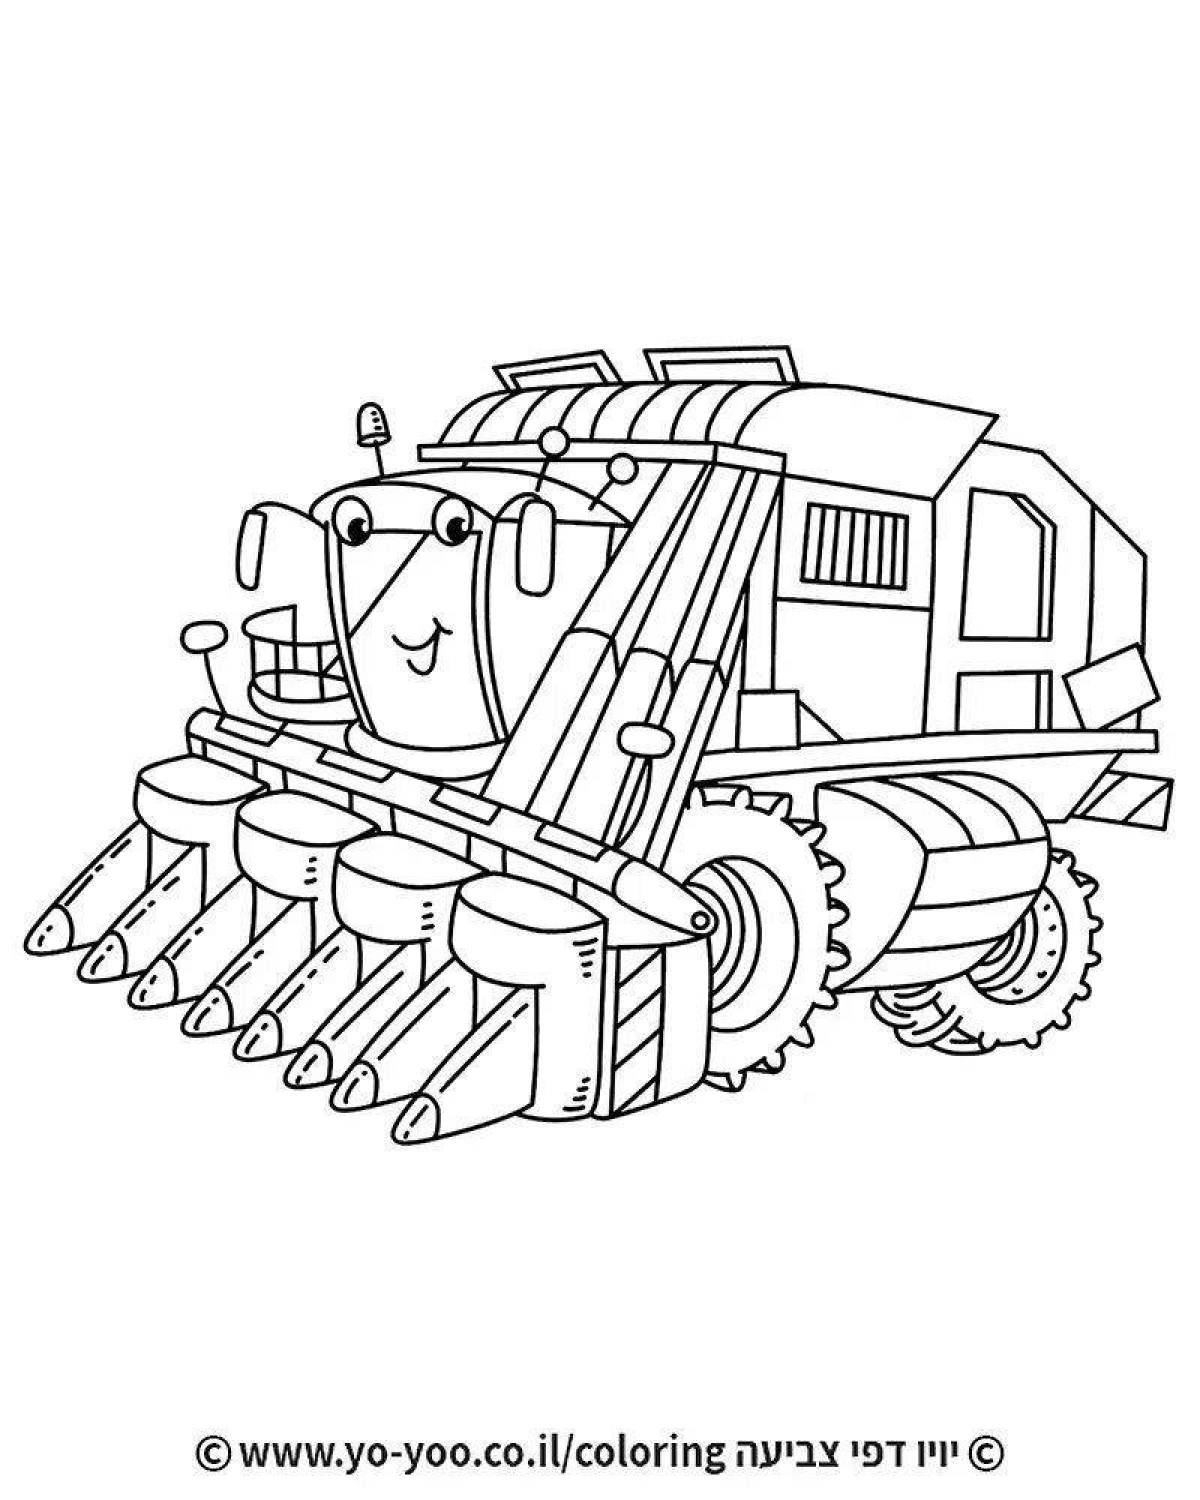 Fun coloring book of agricultural machinery for kids